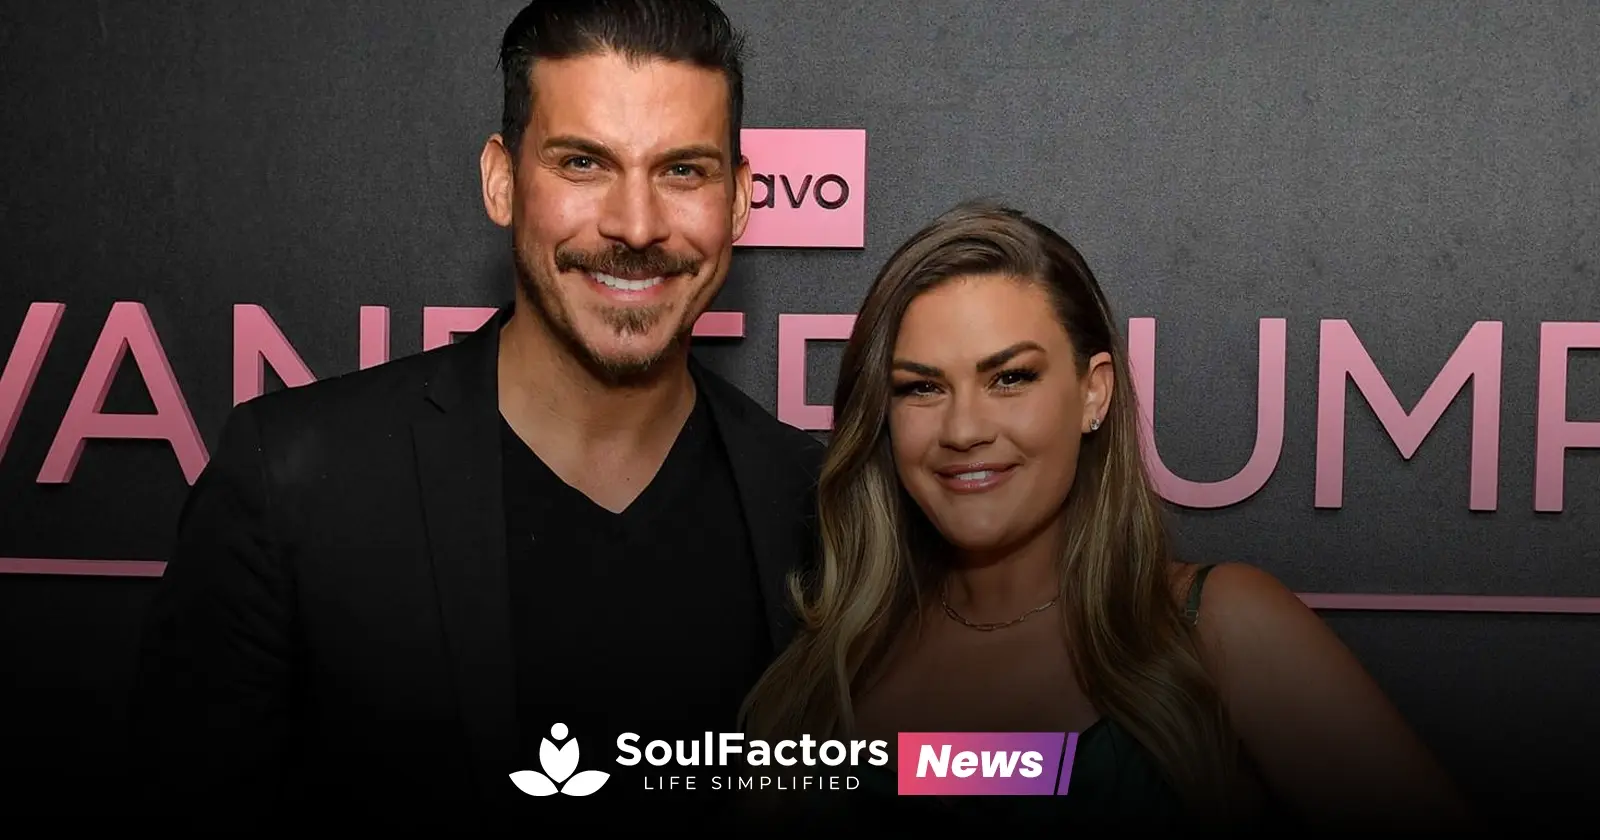 Reality TV stars Jax Taylor and Brittany Cartwright announce separation